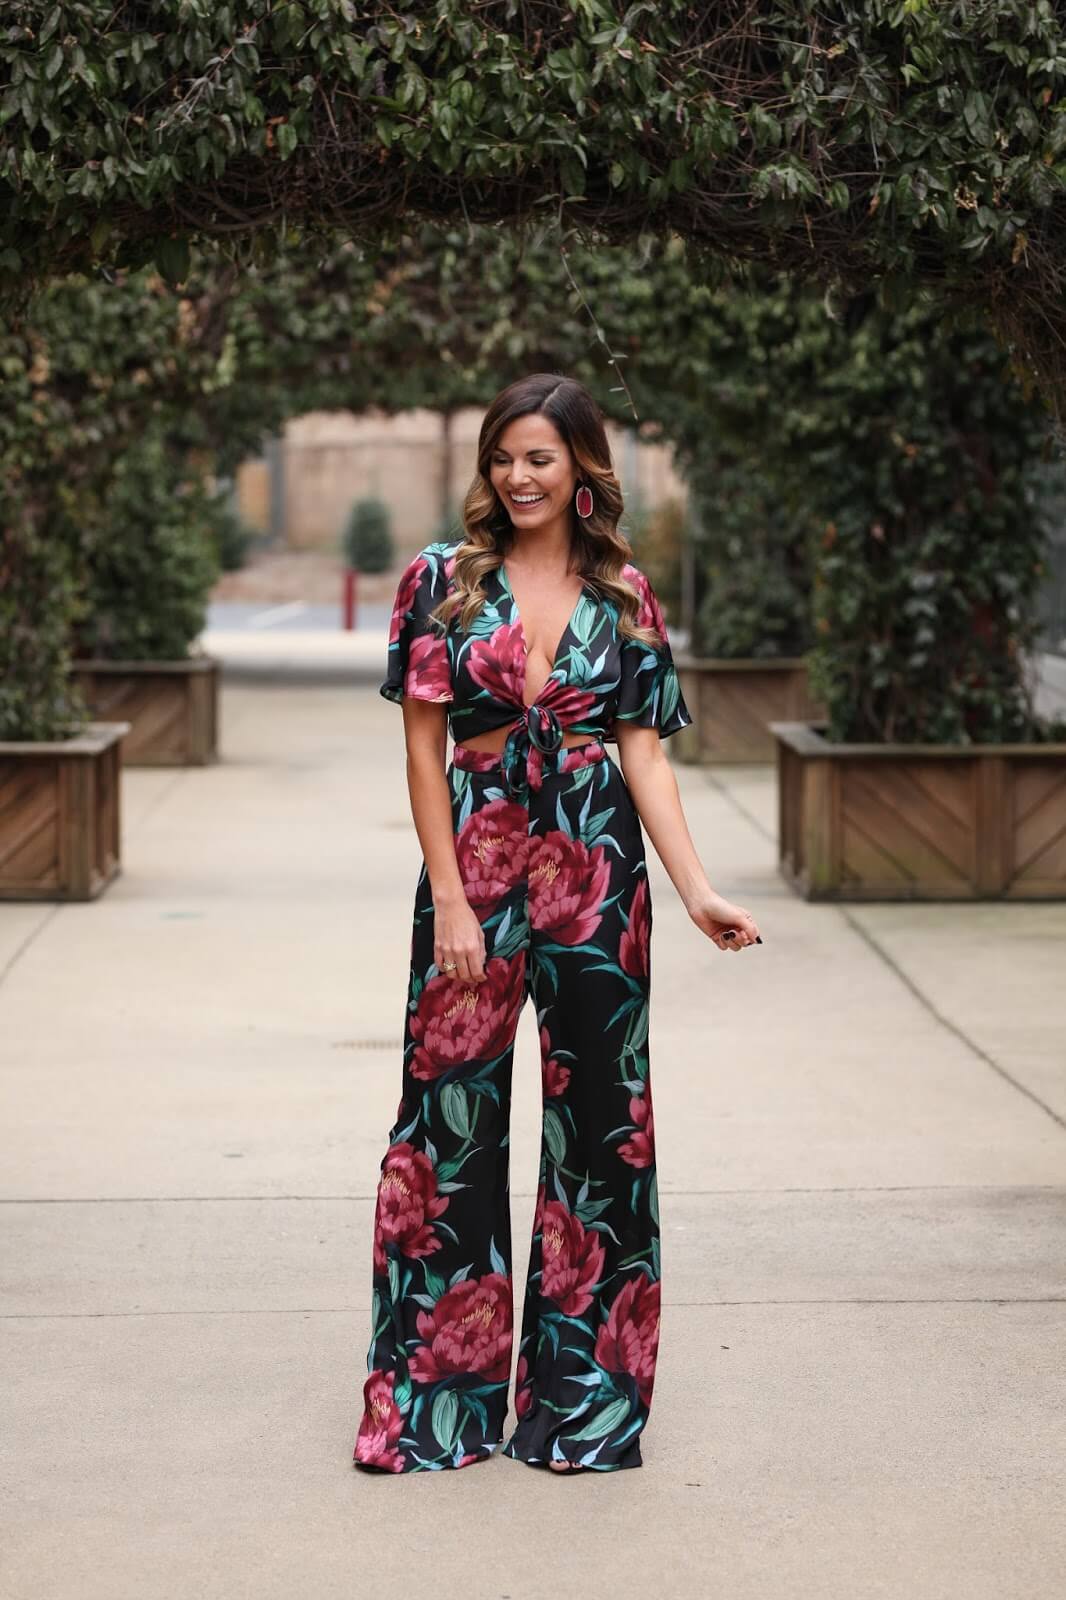 woman in floral jumpsuit in front of arch of greenery